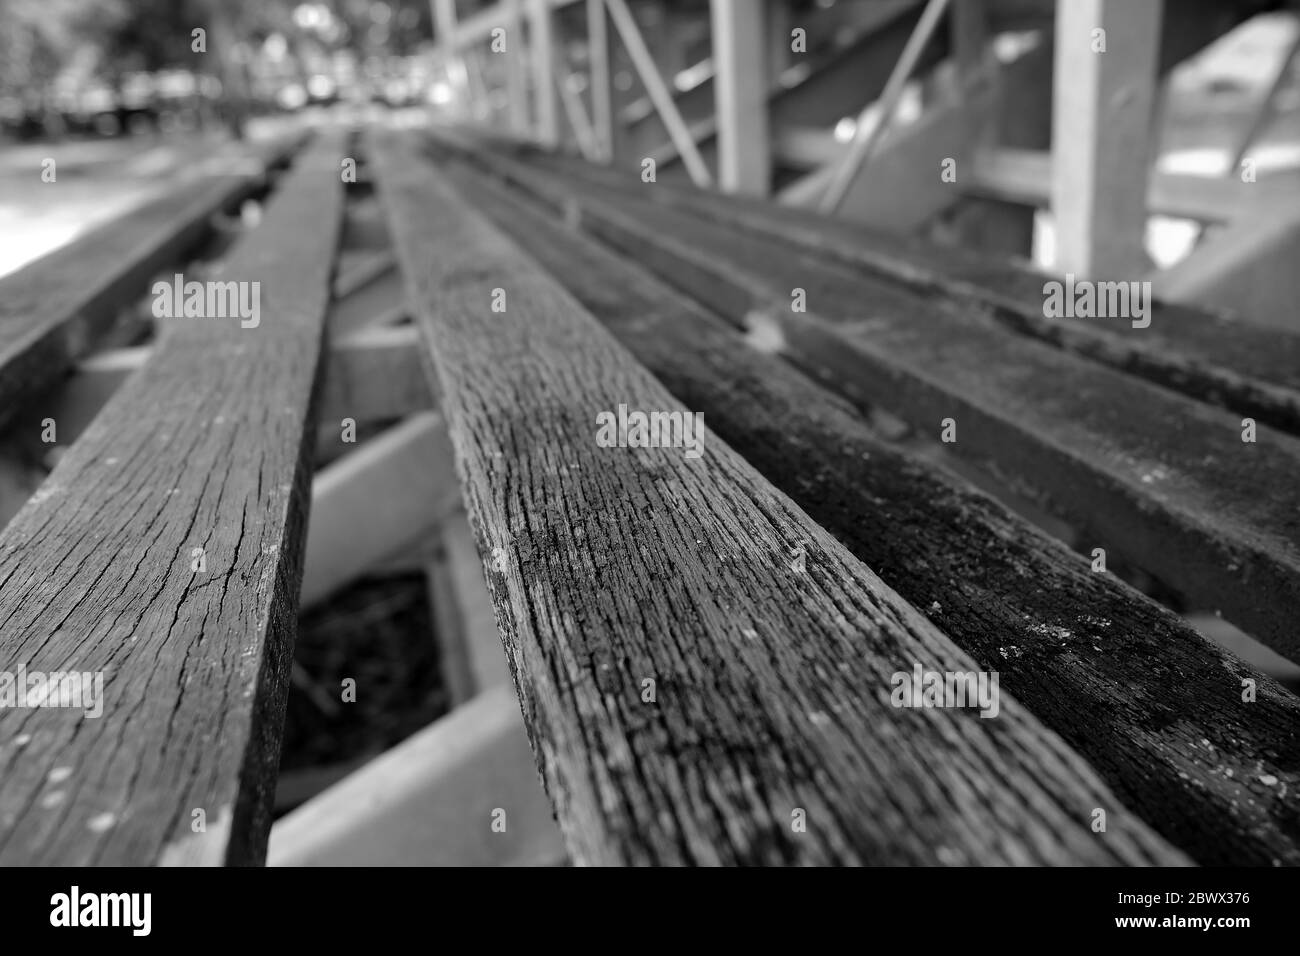 Close up Wood Stadium Seats in Black and White Tone. (Selective Focus) Stock Photo